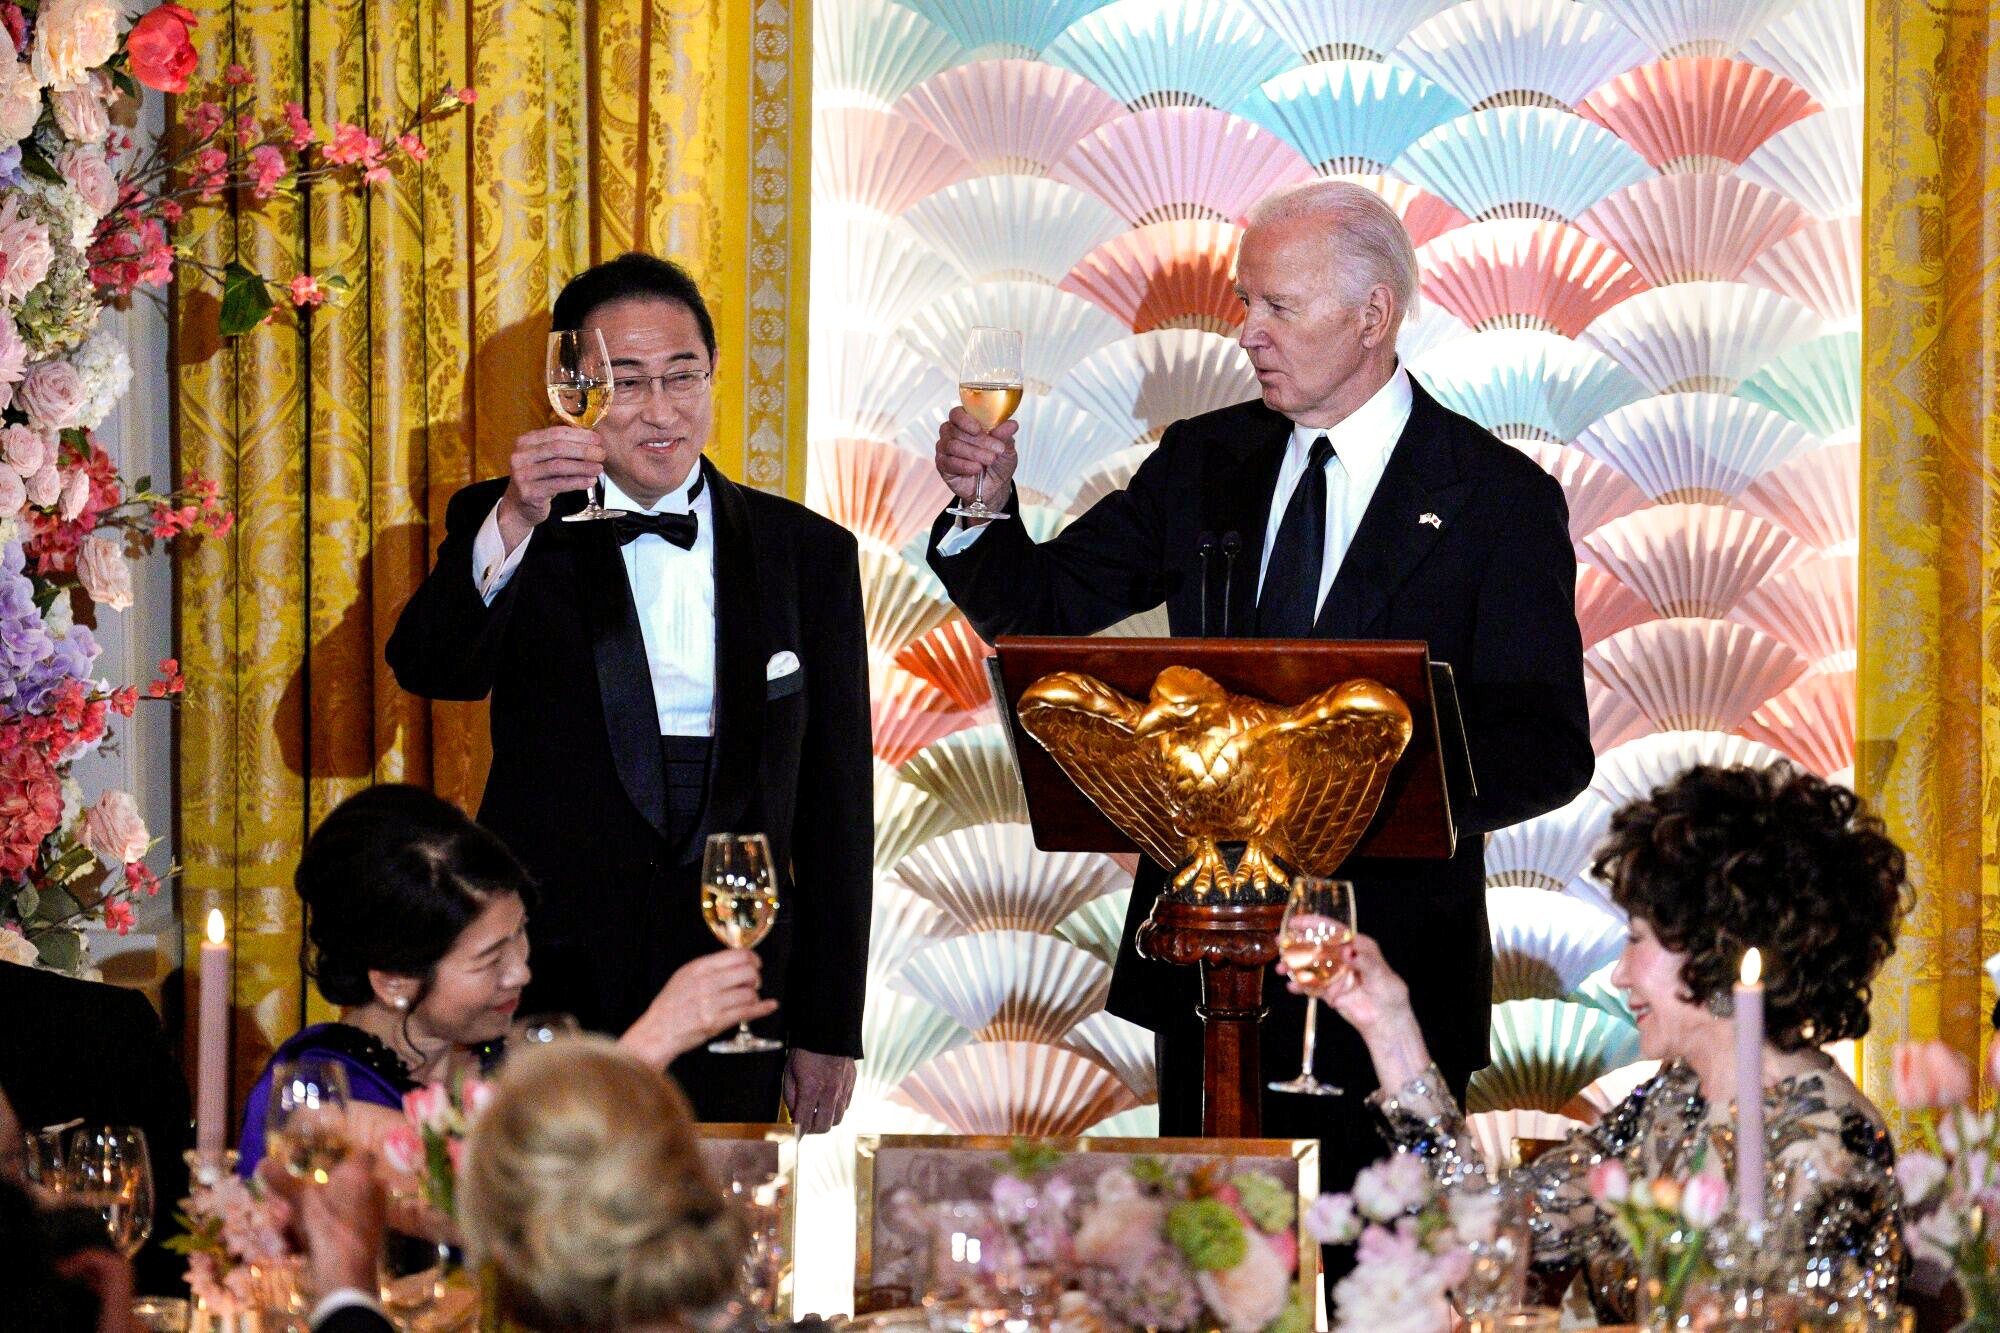 US President Joe Biden, right, and Japanese Prime Minister Fumio Kishida are pictured in the East Room of the White House. Photo: Bloomberg